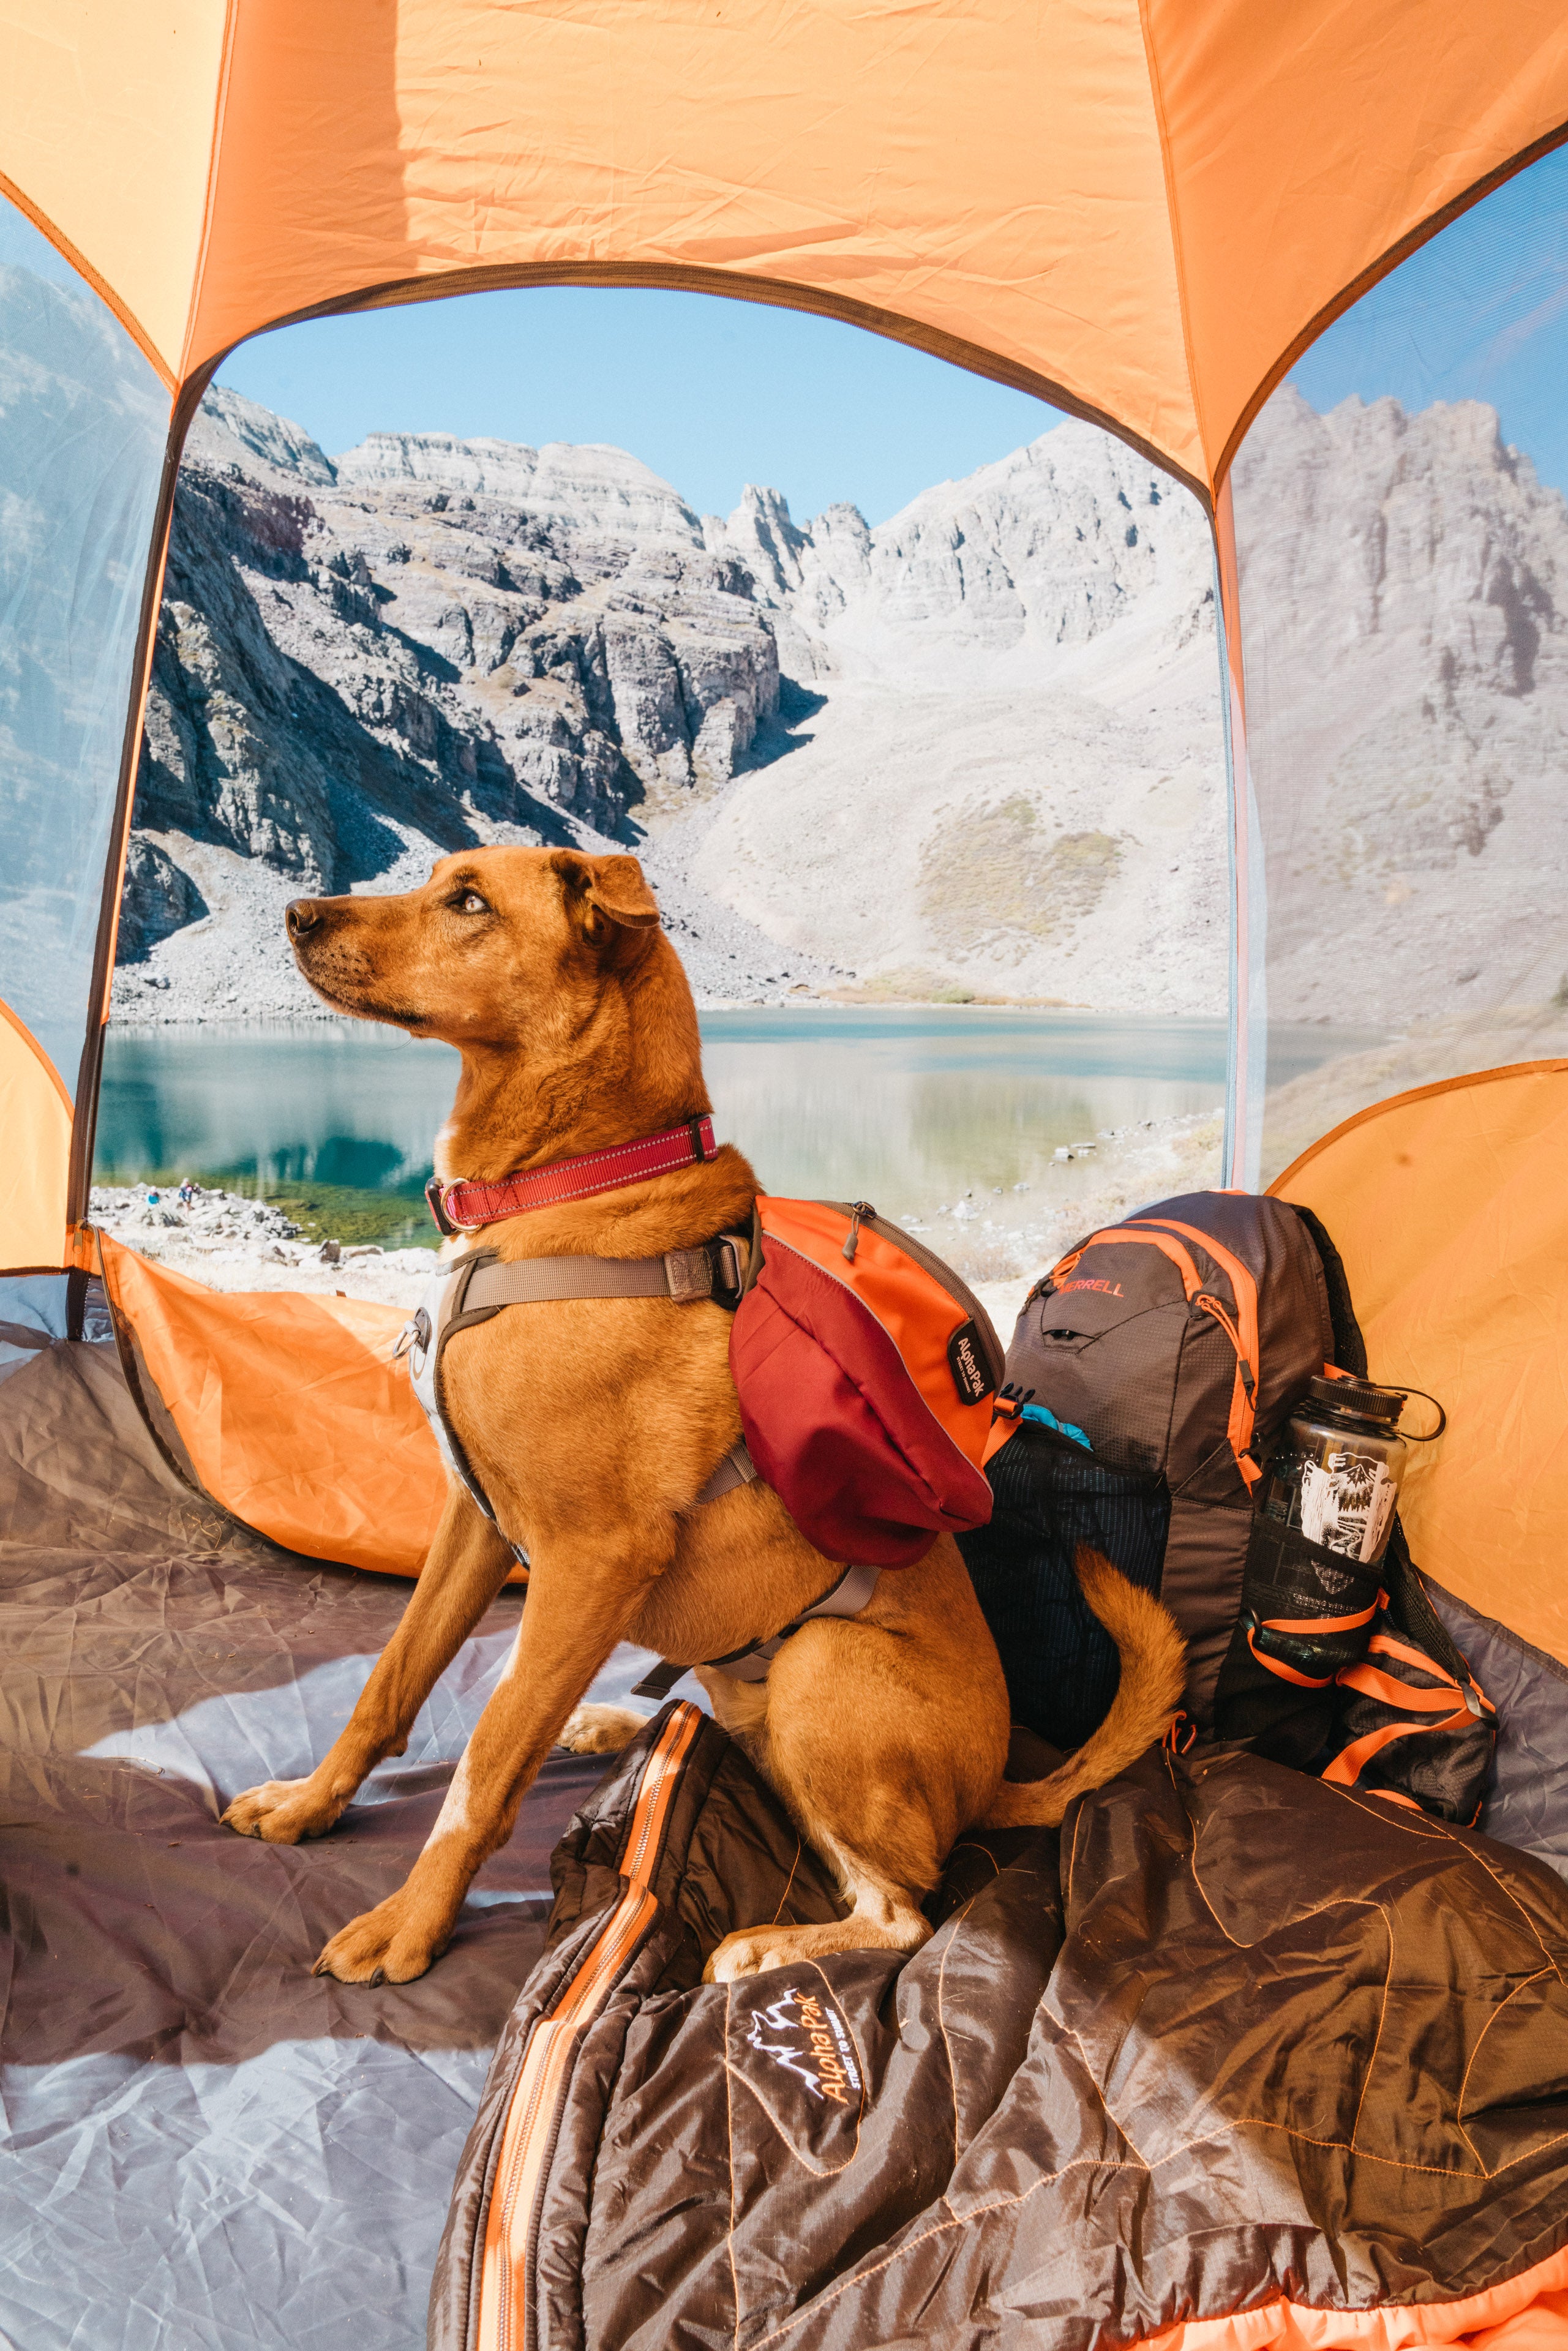 The Dos and Don'ts of Camping With Your Dog